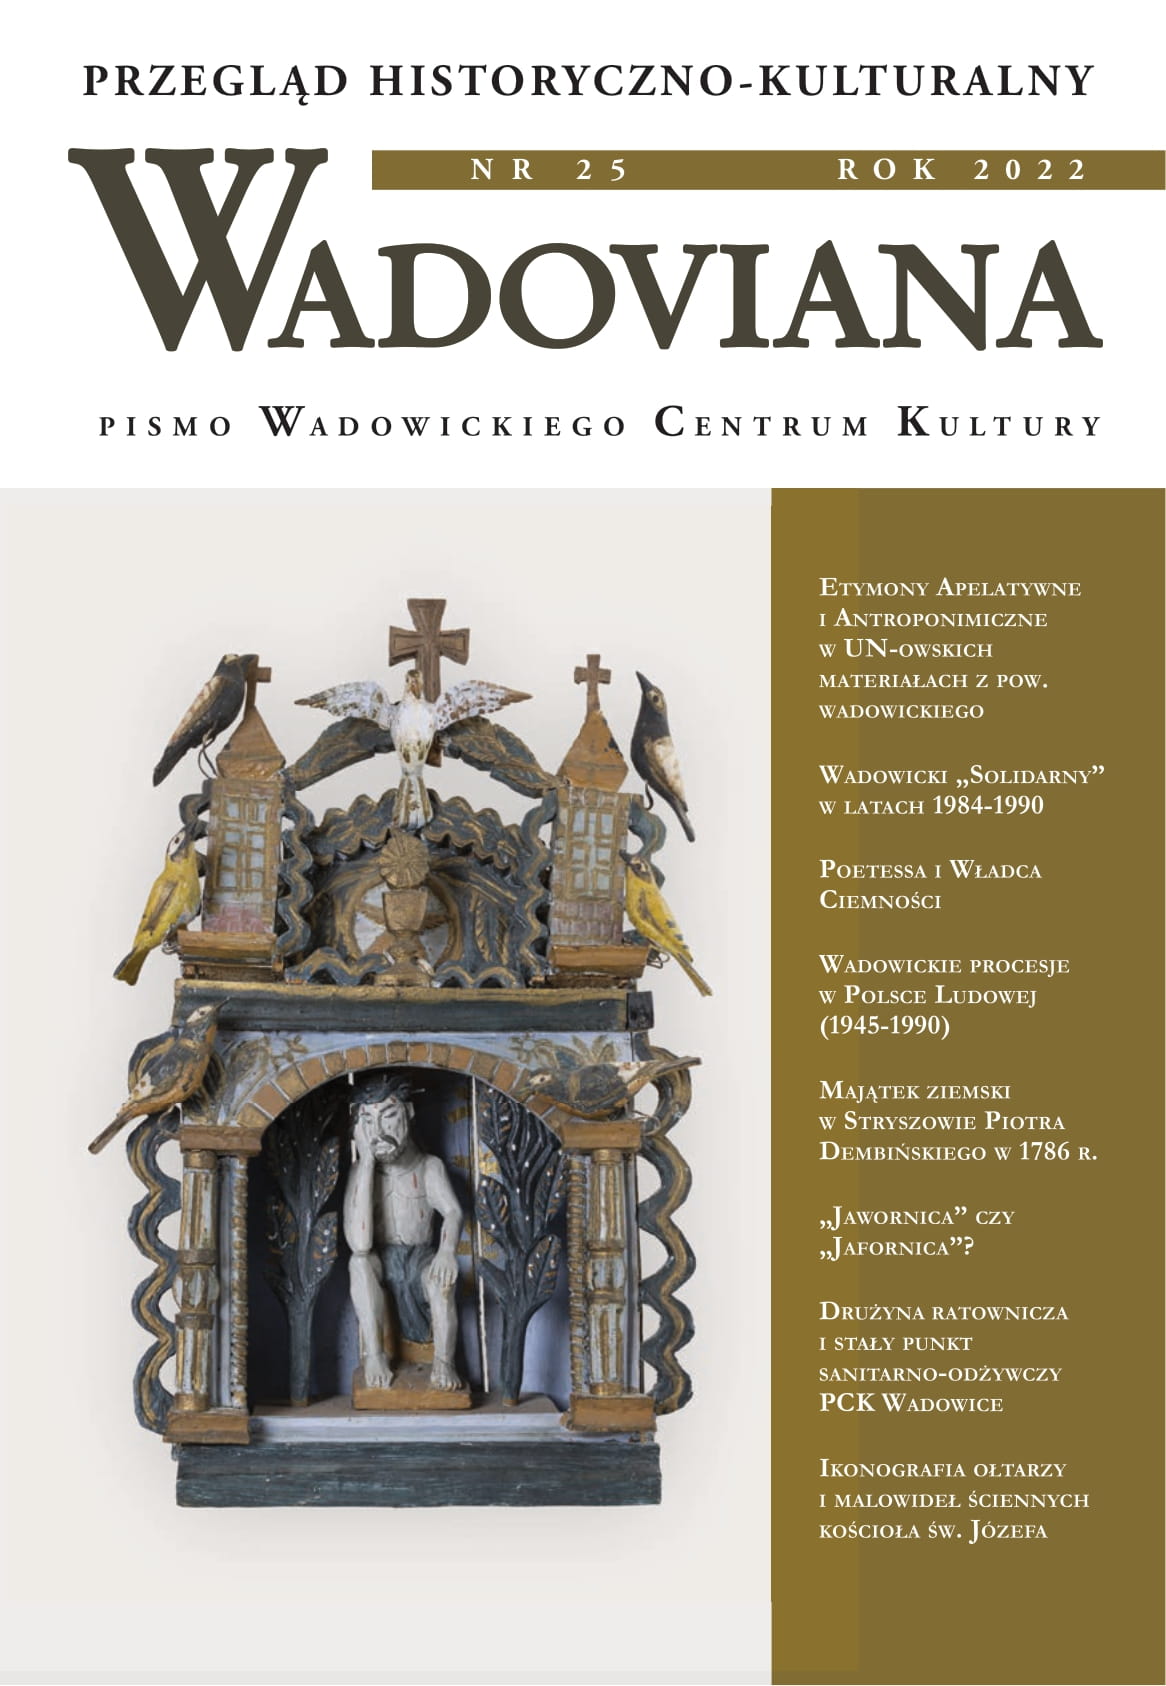 The estate in Stryszów in 1786 Cover Image